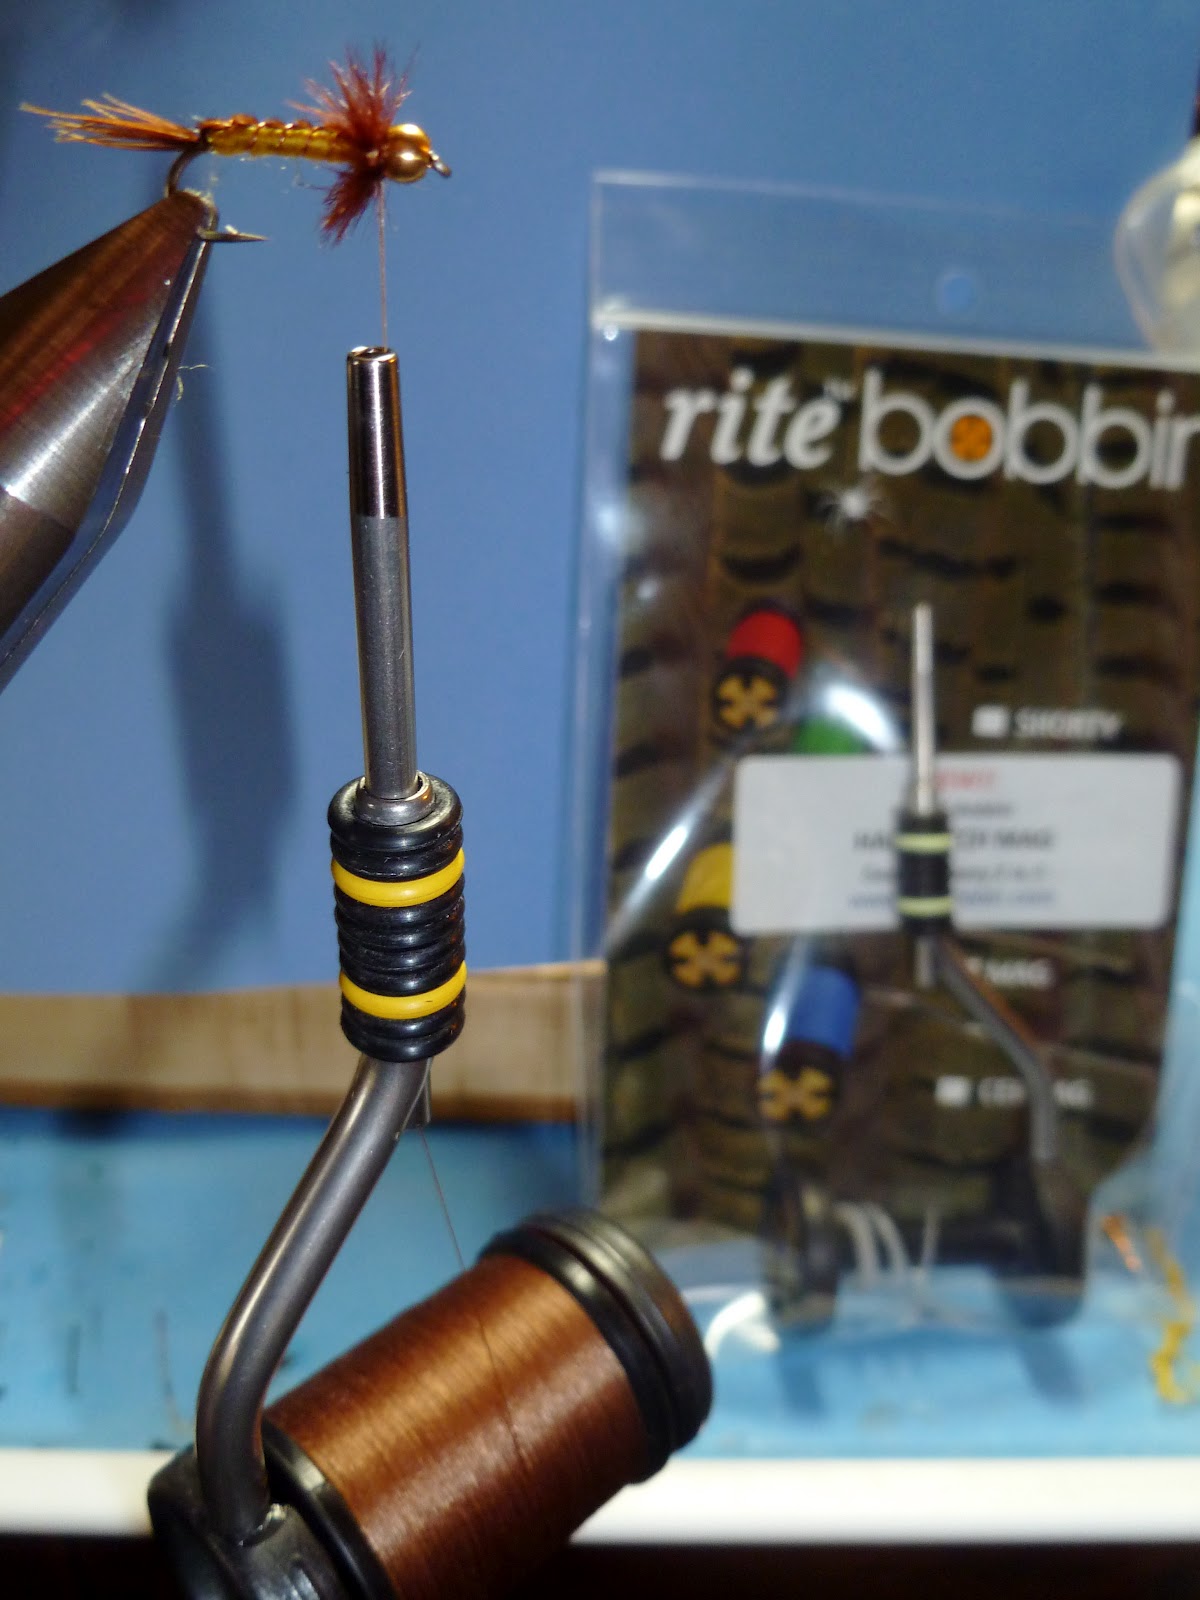 SHORTY SIZE FLY TYING TOOL RITE BOBBIN CERAMIC TUBE MADE IN THE USA 